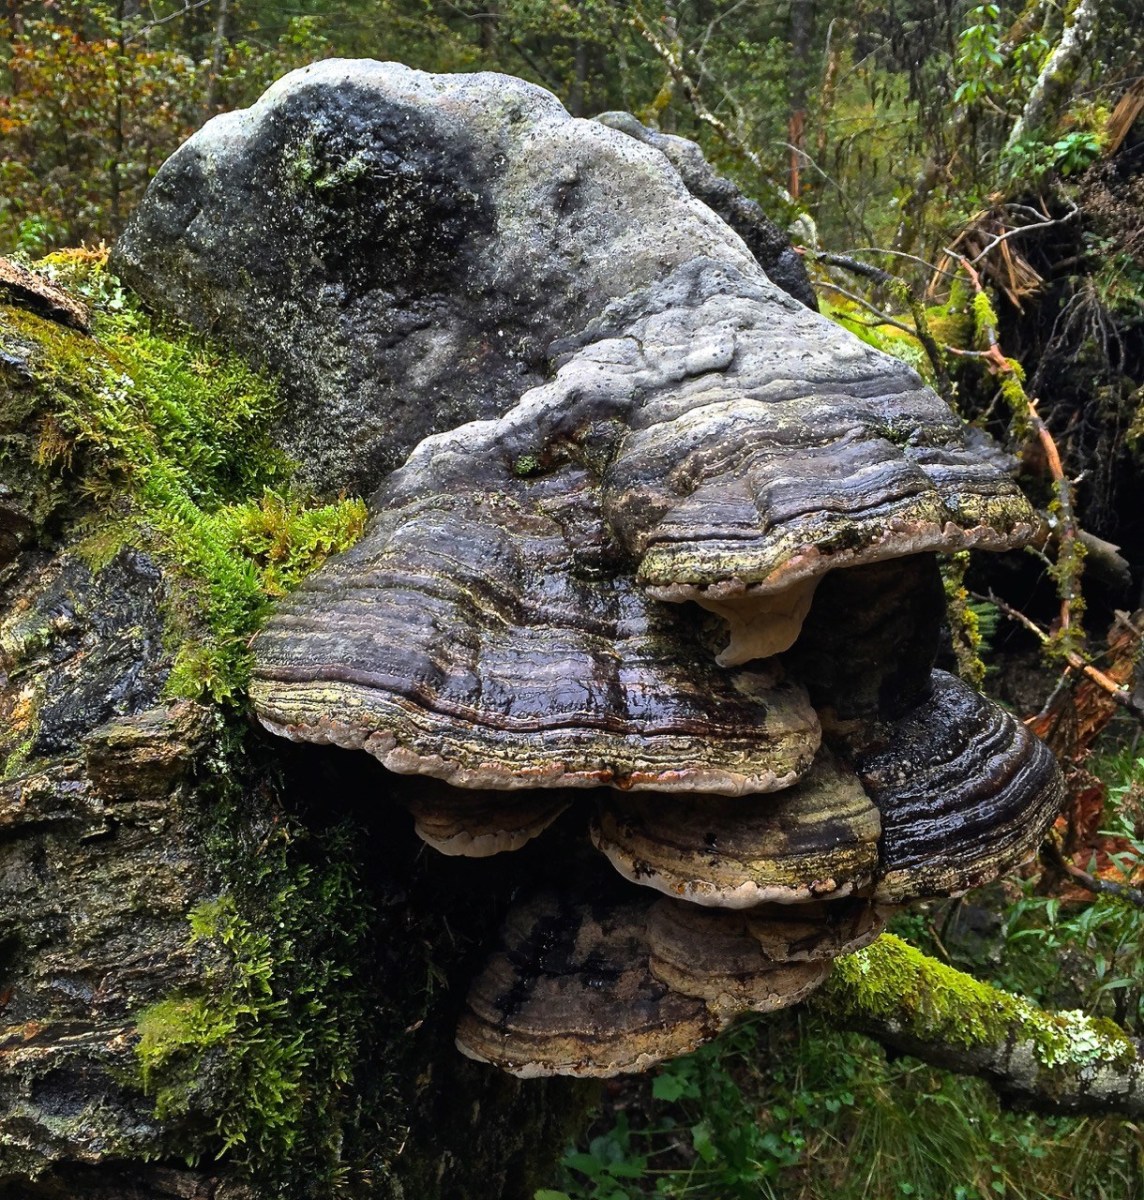 Fomes fomentarius, one of a group of fungi that developed the ability to process tough lignin about 300 million years ago. That evolutionary step spelled the end of the age of the formation of new coal deposits, as the fungi decomposed the dead trees before they had a chance to turn into lignite.